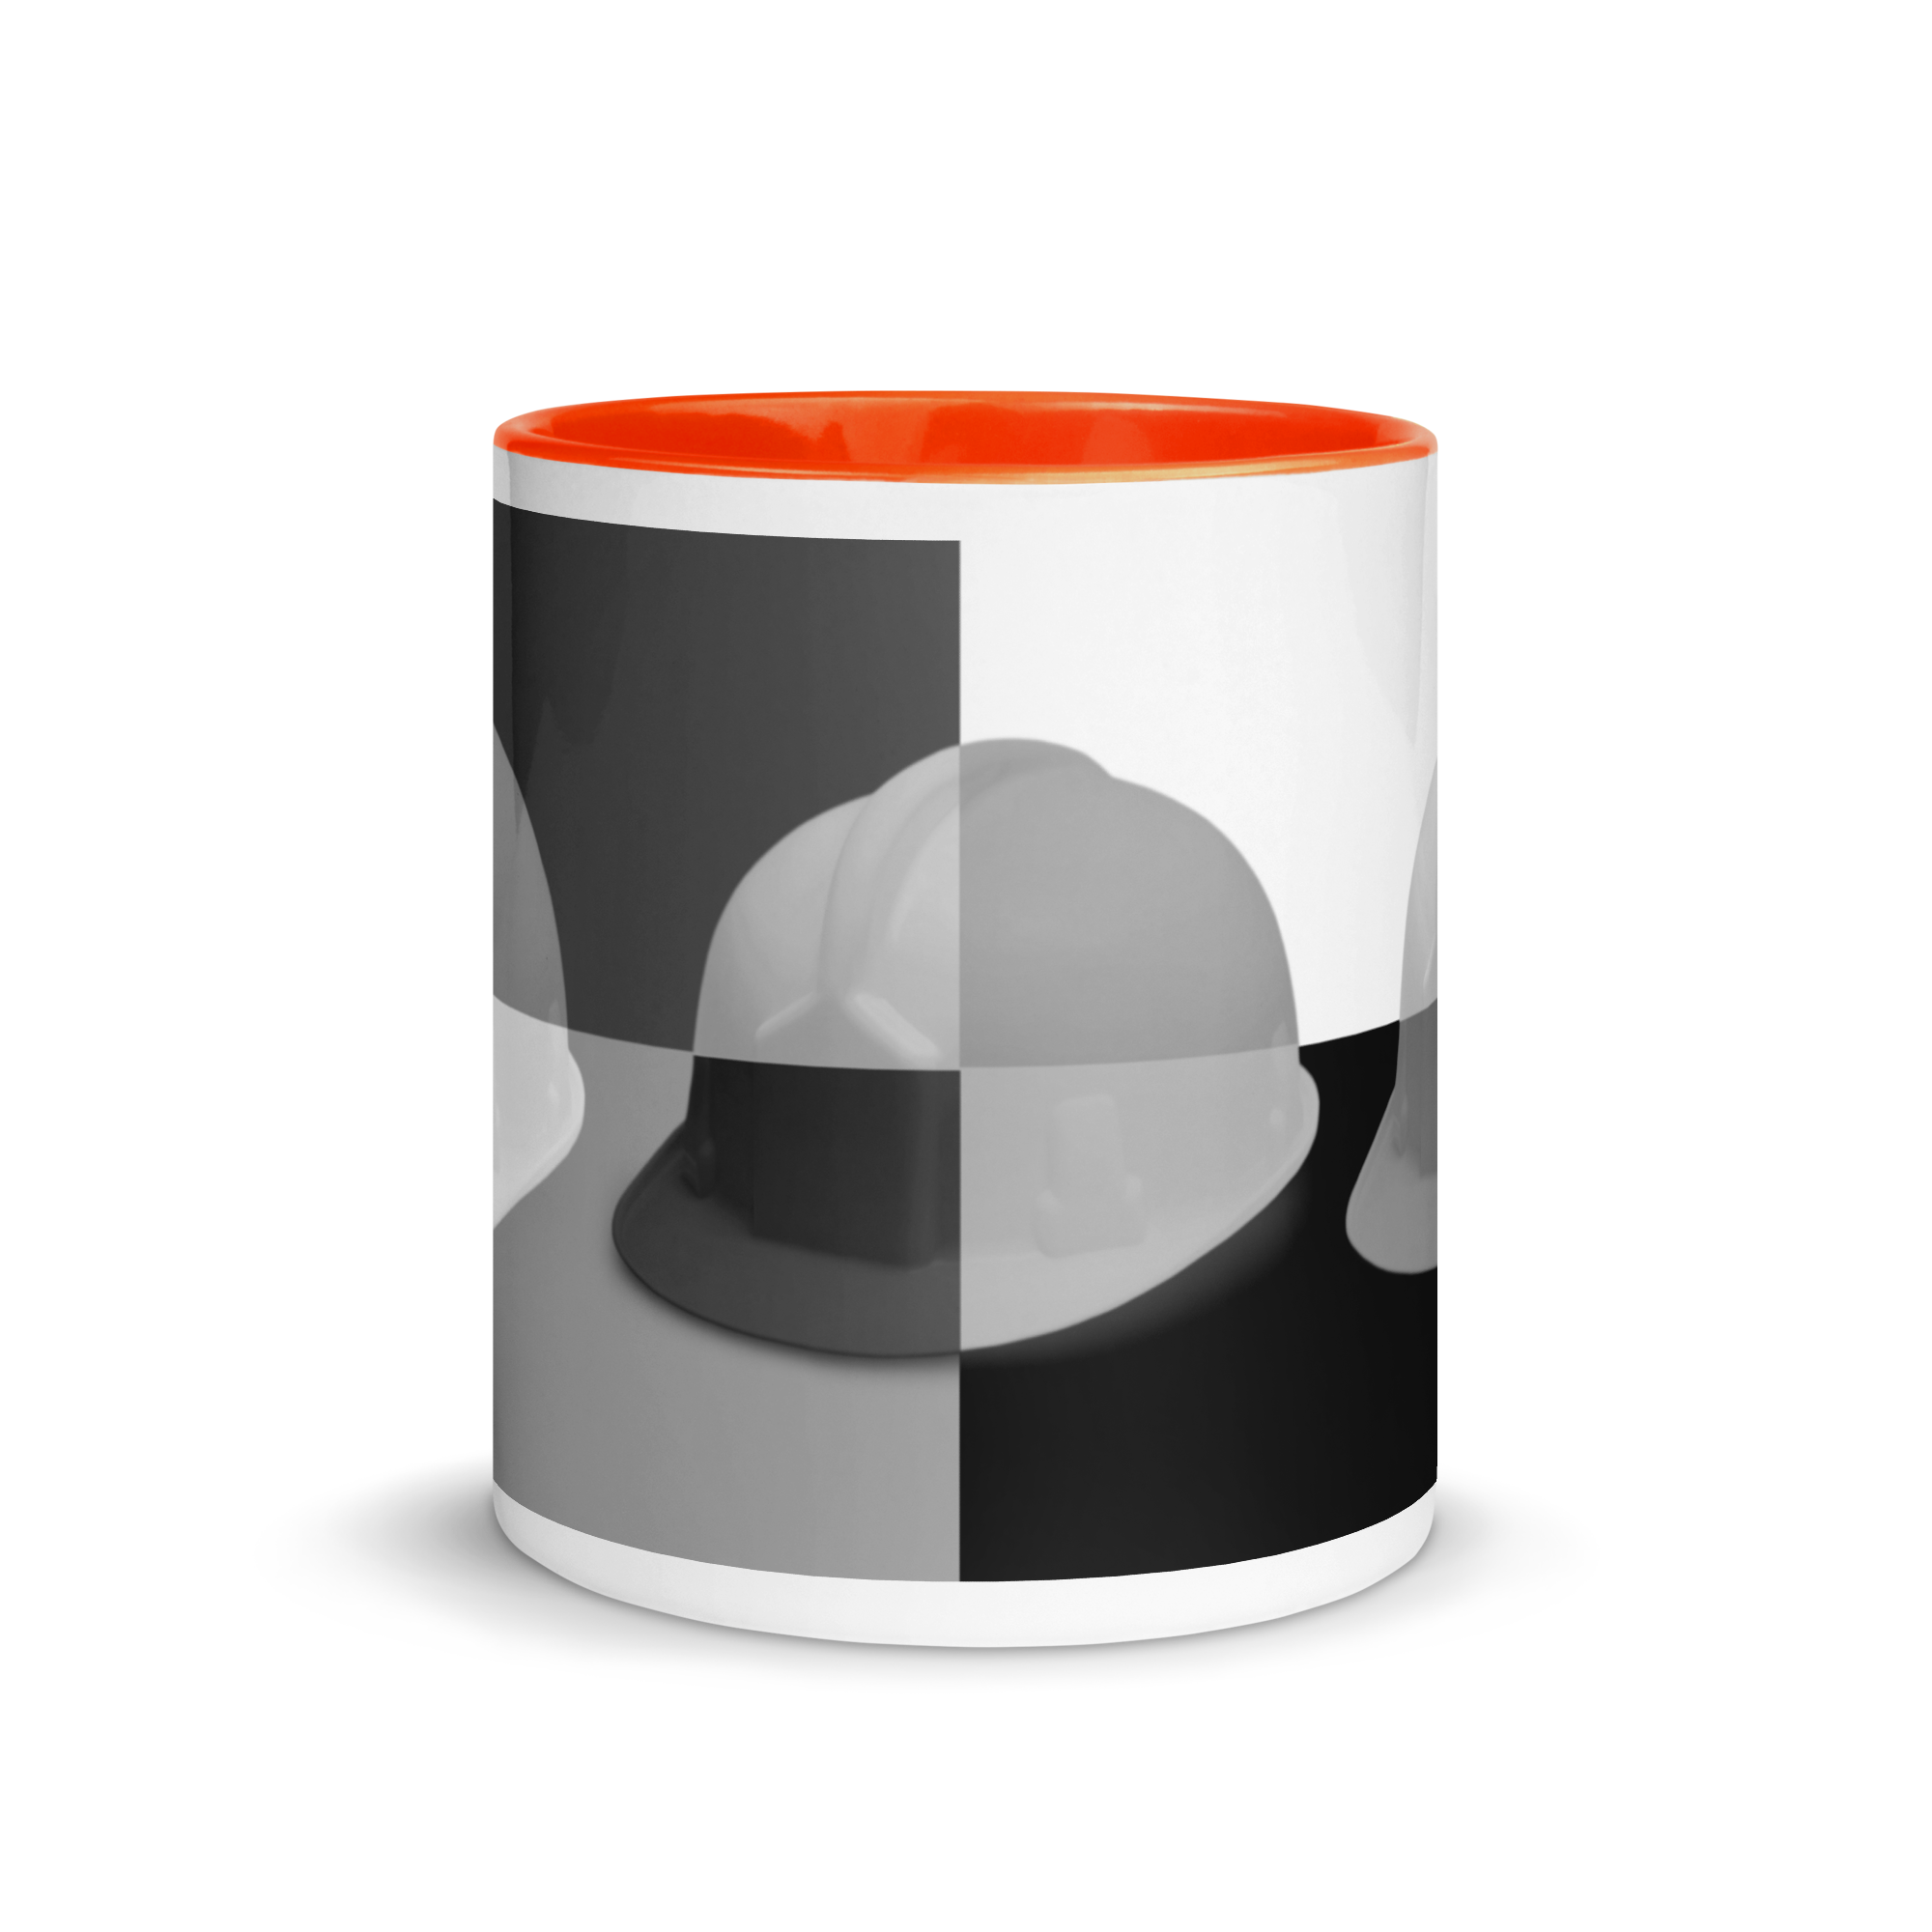 White ceramic mug with a bold hard hat pop art print in a black and grey colorway with orange color on the inside, the rim, and the handle.